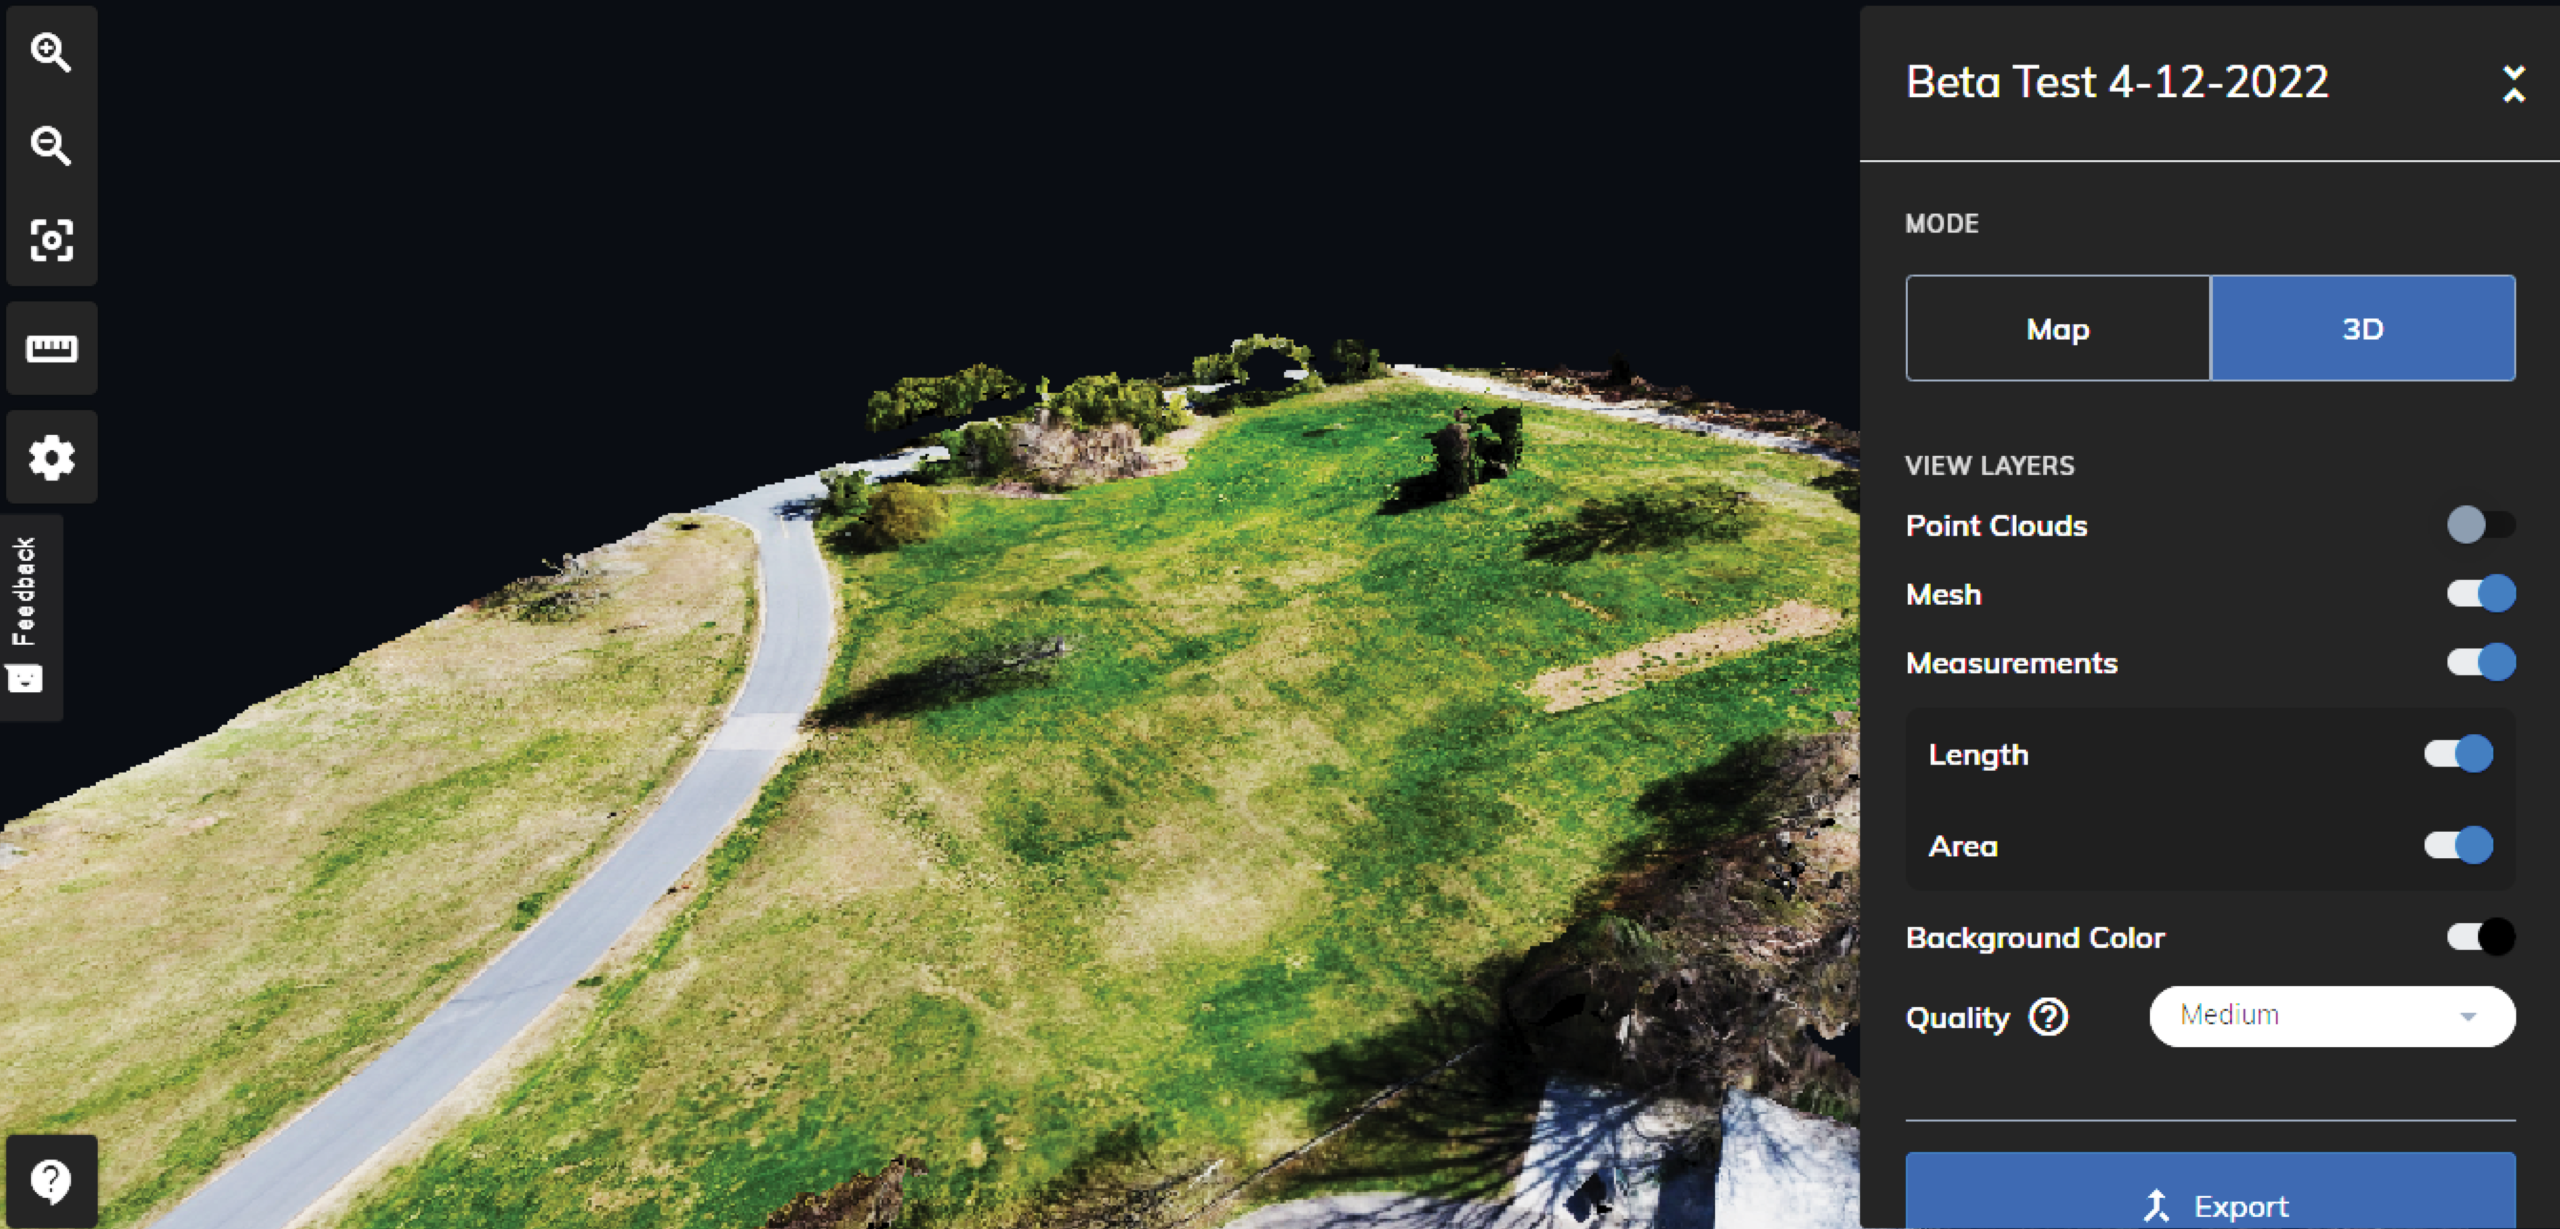 A 3D digital twin generated during a beta test of Mapware Fly using a DJI Mini 2 drone